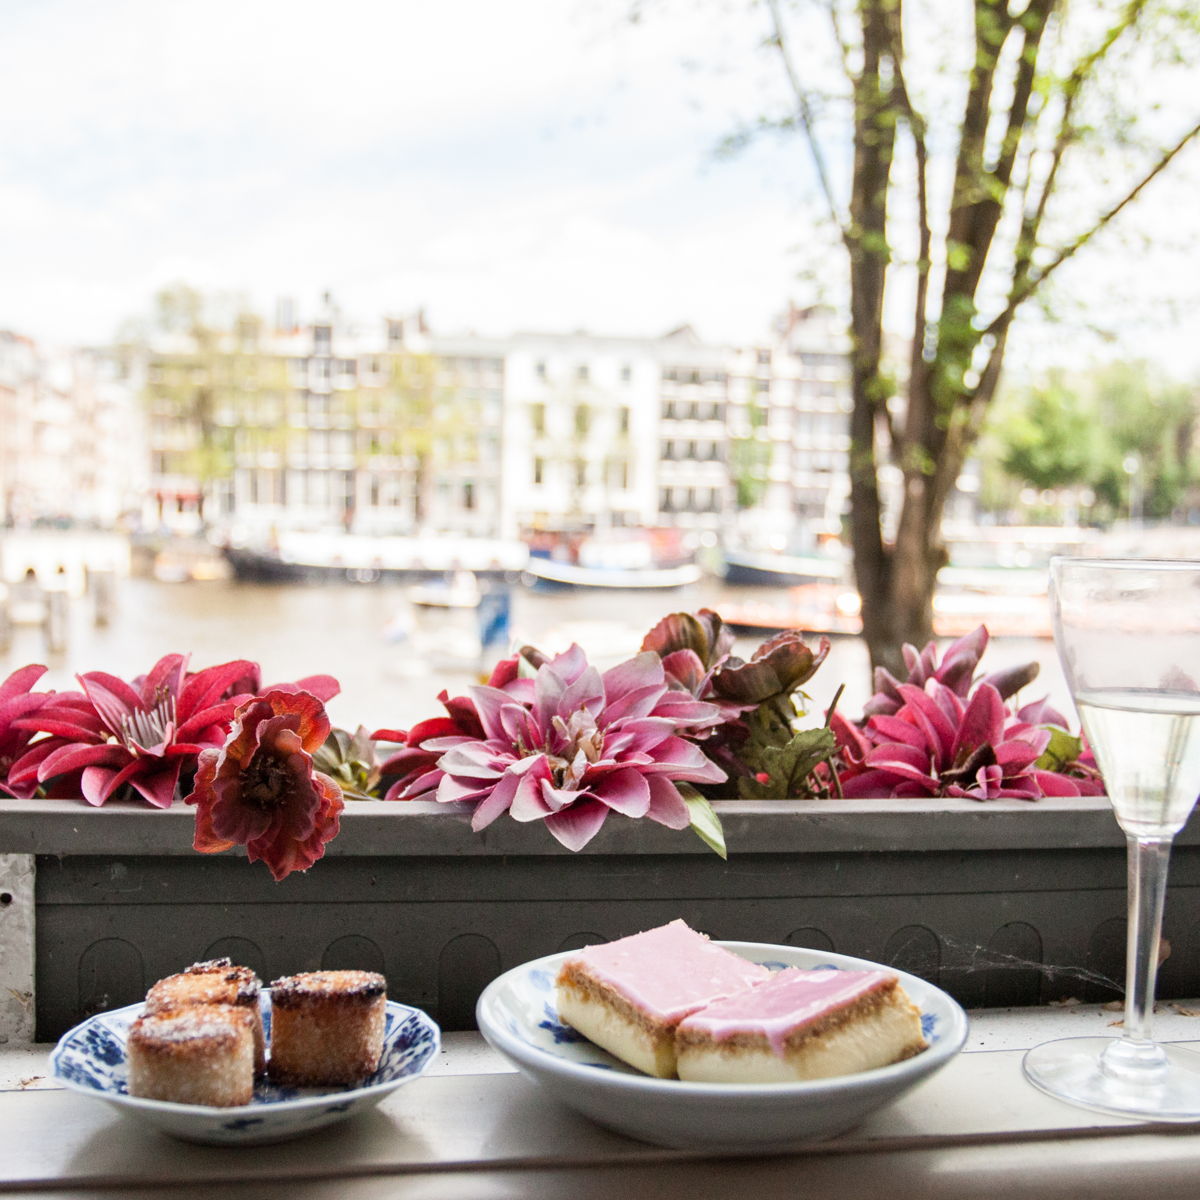 Typical Dutch lunch on the Amstel river